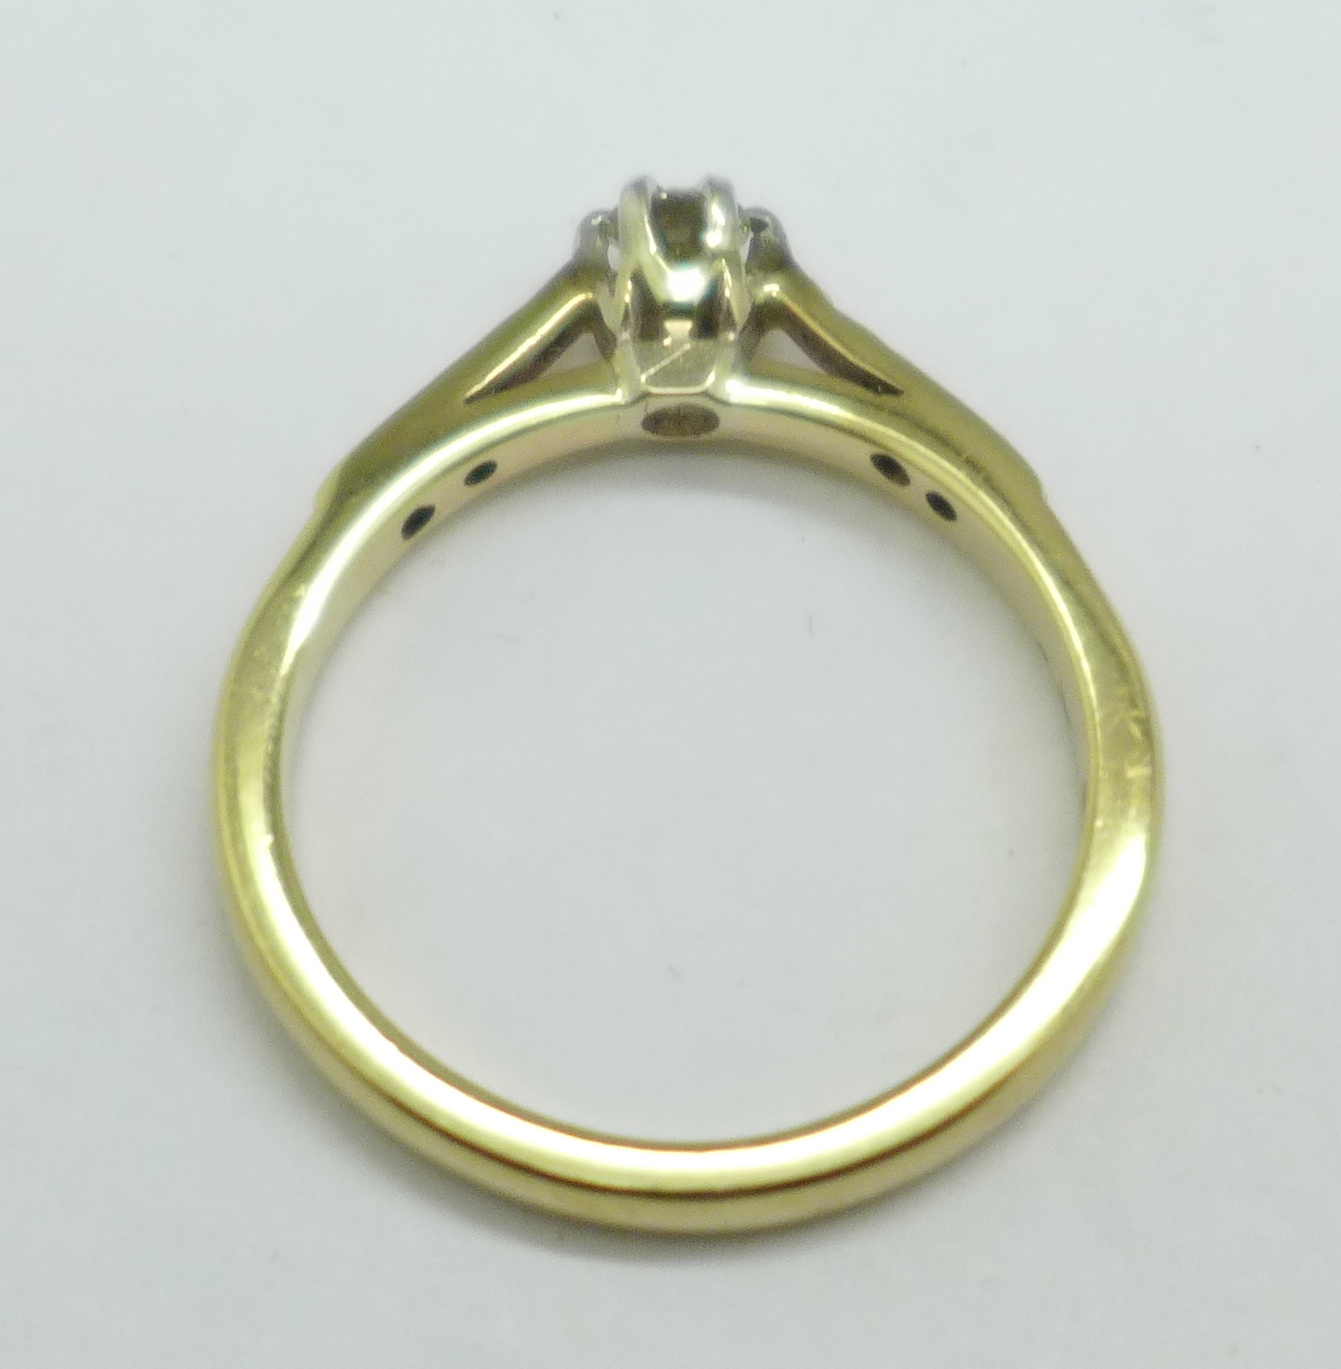 A 9ct gold and nine stone diamond ring, 3g, P, main stone approximately 0.25carat weight - Image 3 of 3